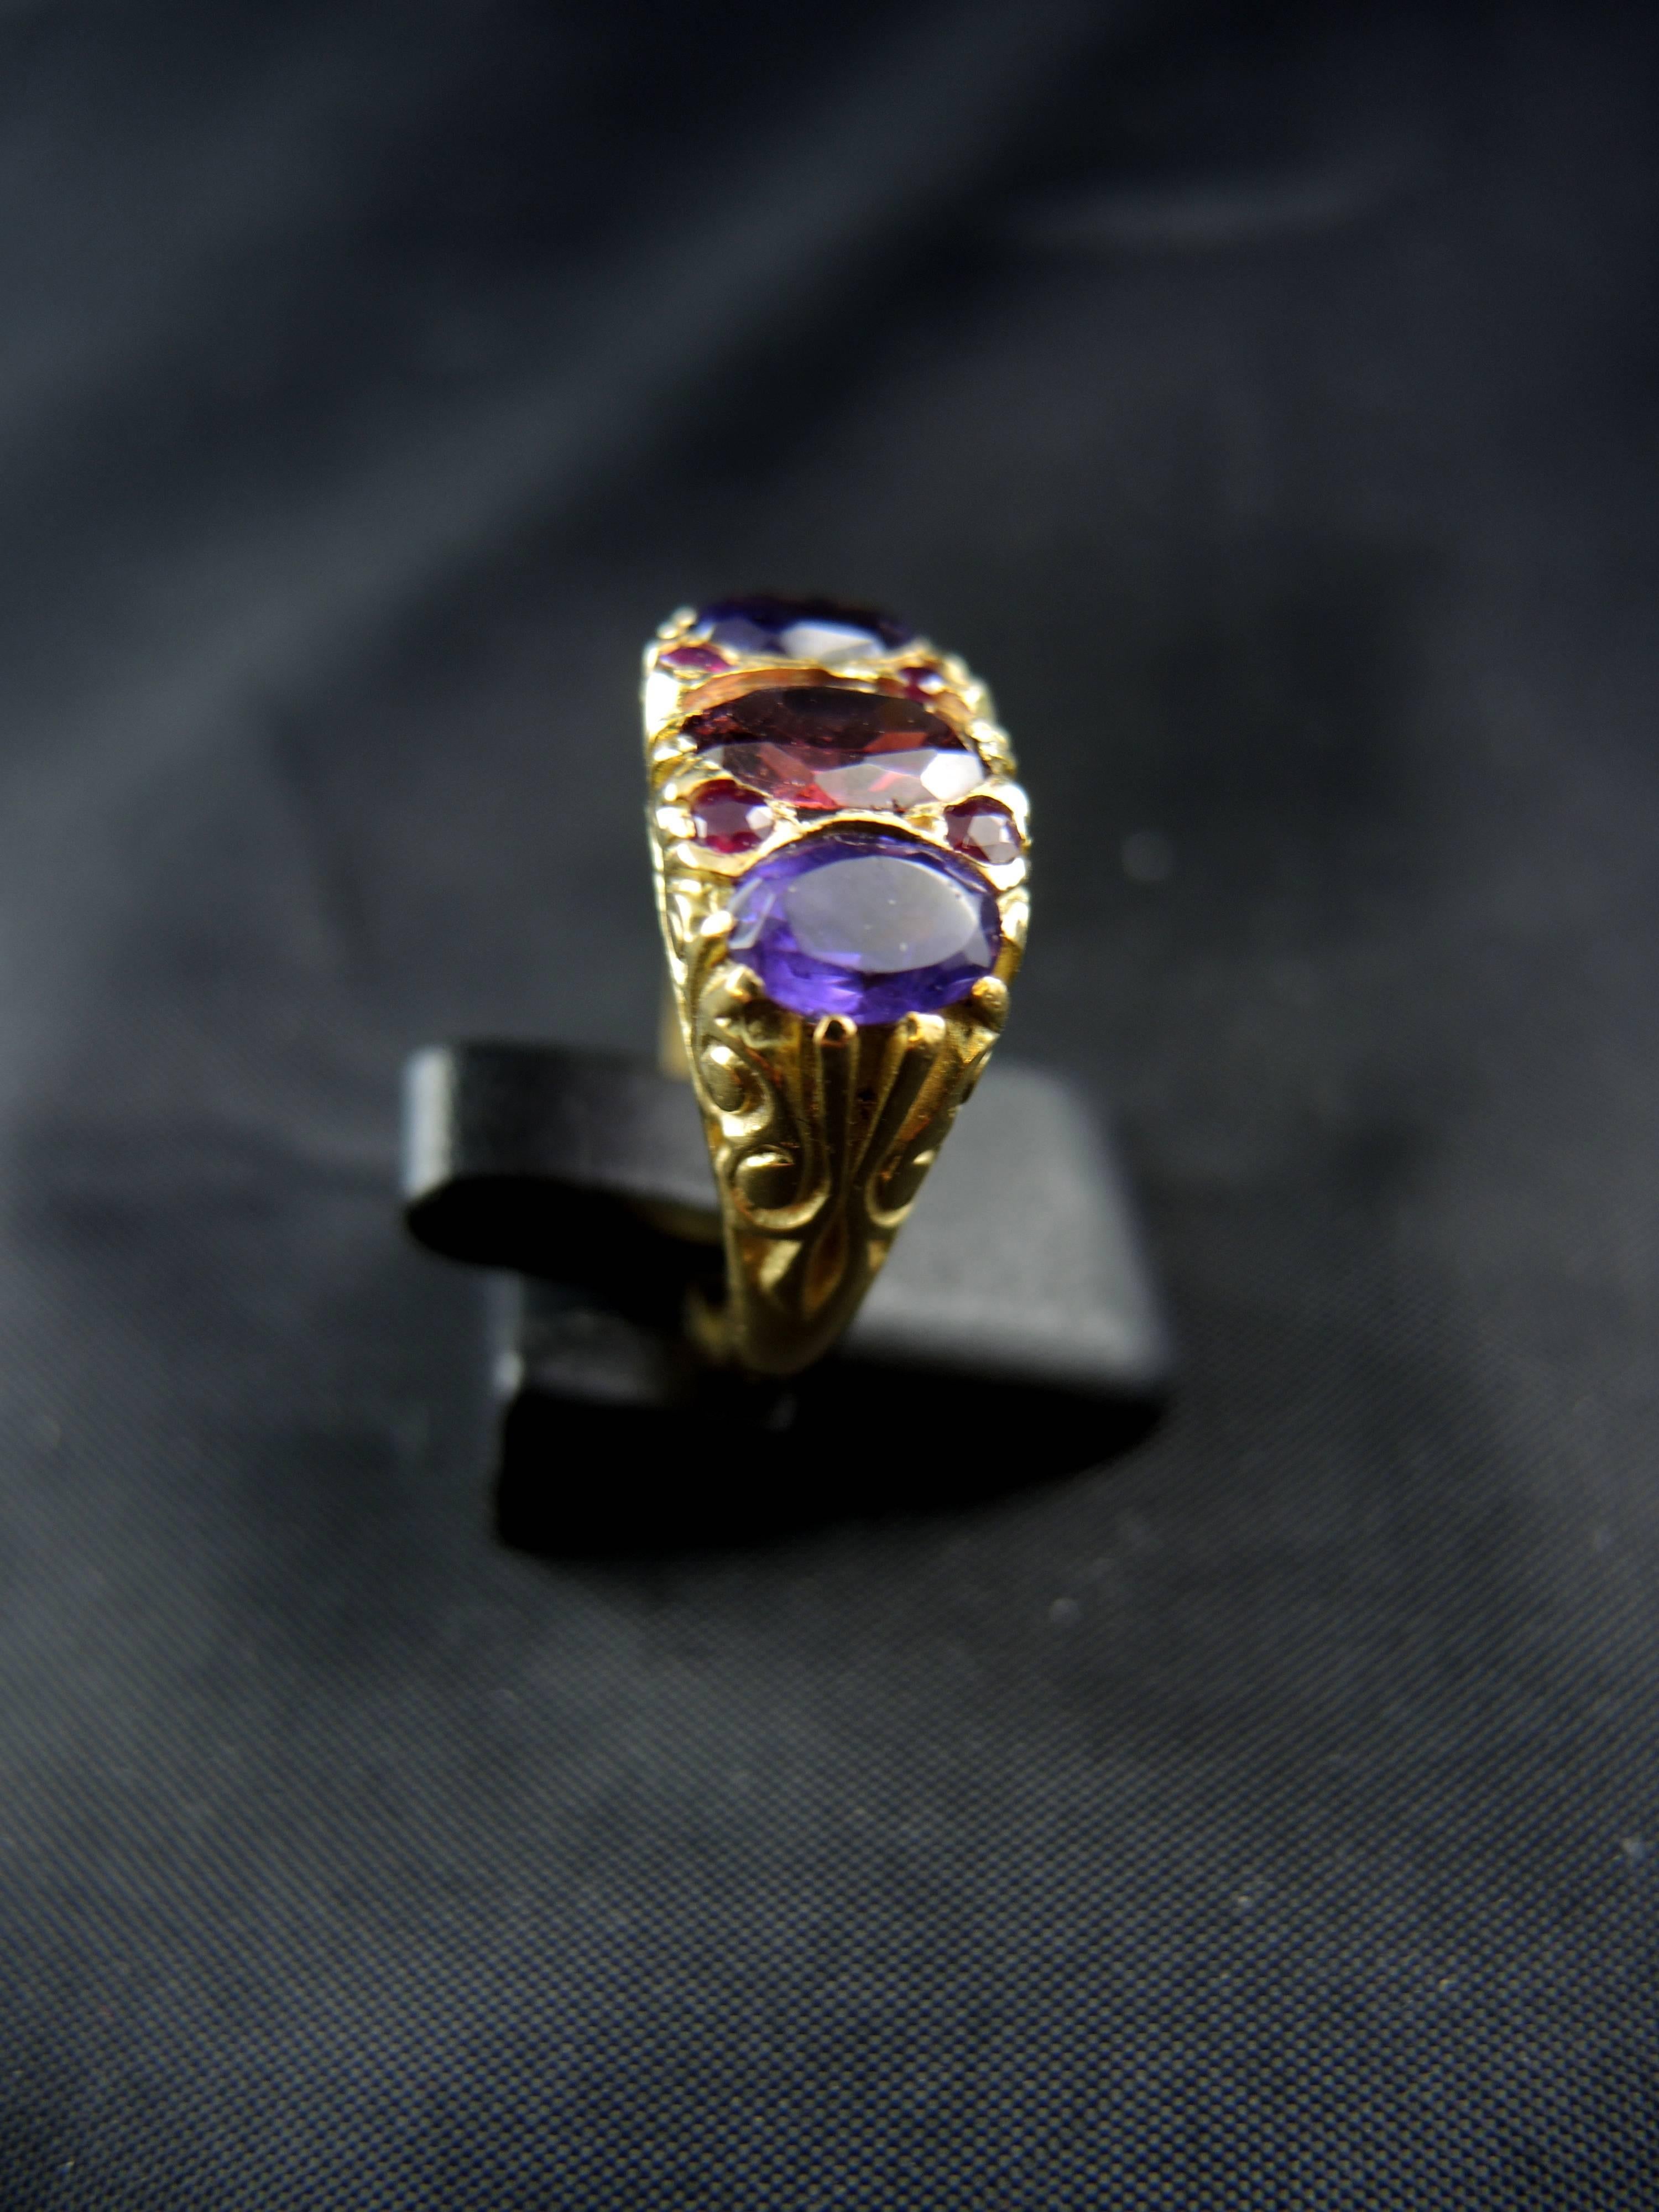 Women's Antique French Three-Stone Ring with Garnet Amethysts and Ruby, 19th Century